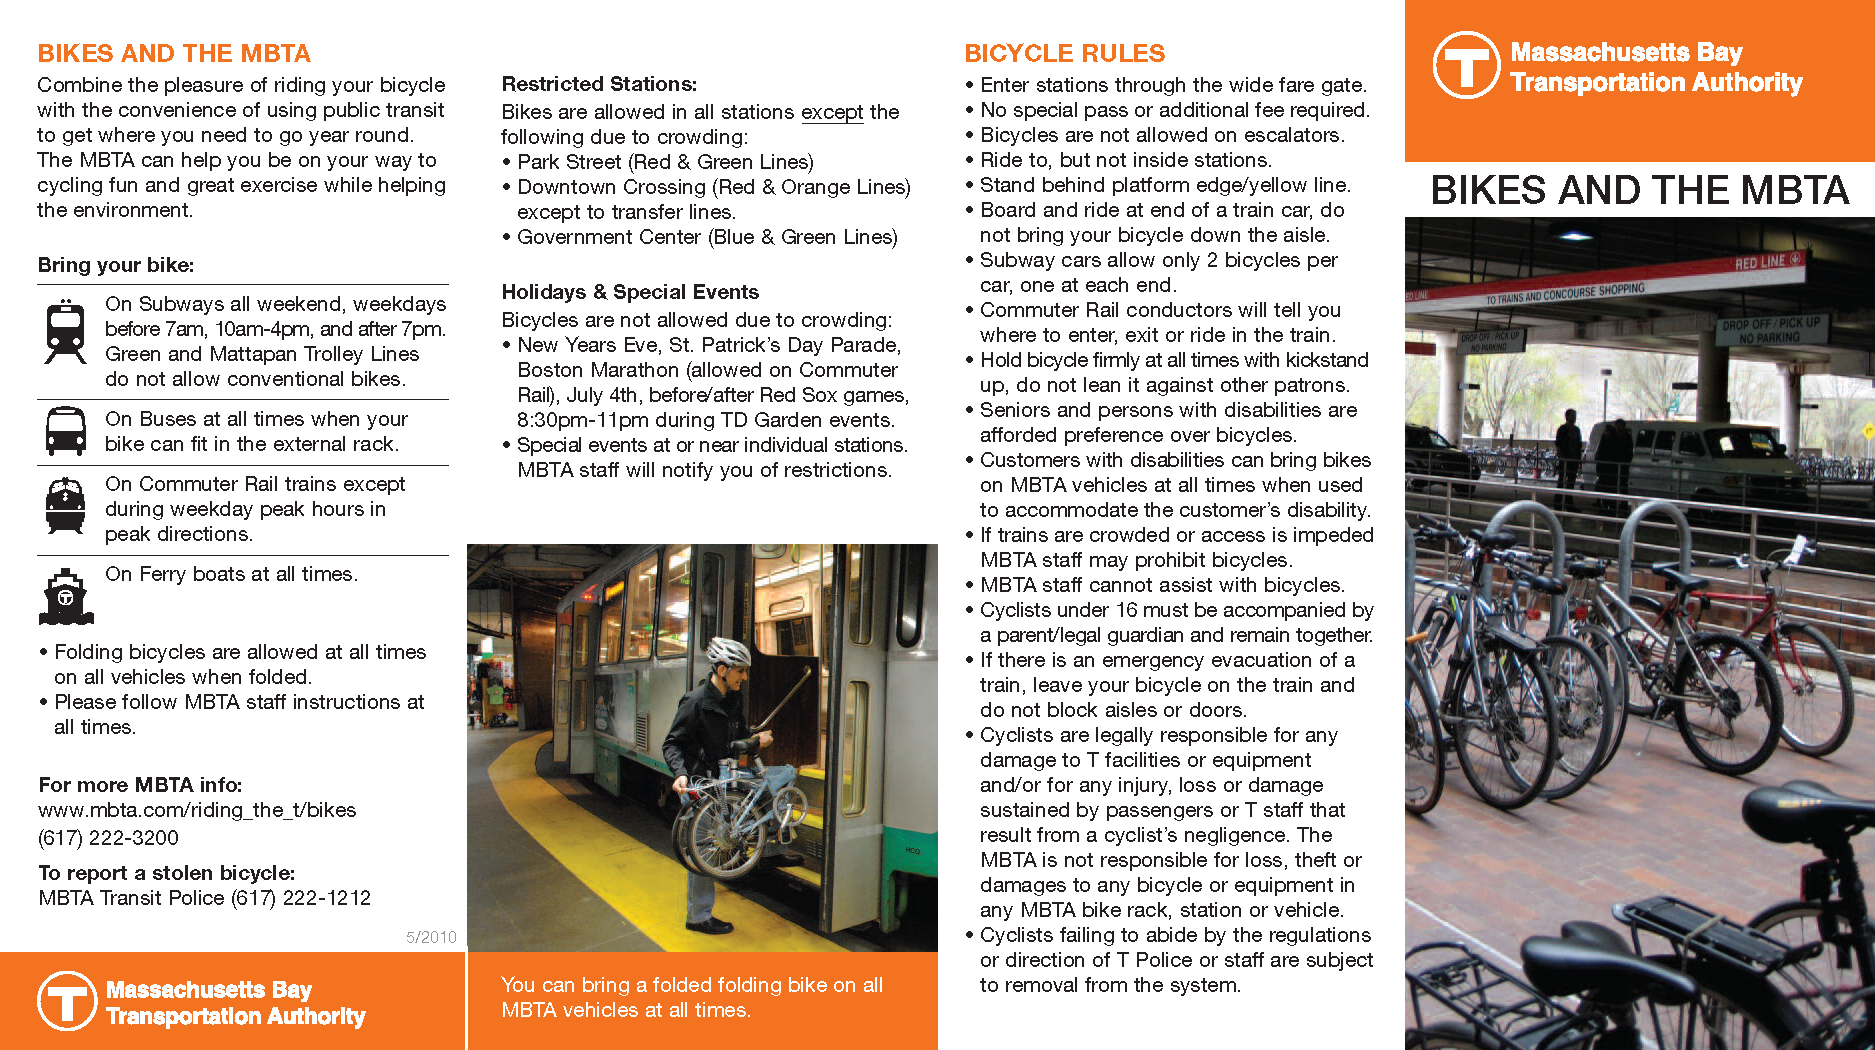 An image of "Bikes and the MBTA" brochure. Page 1 of 2.